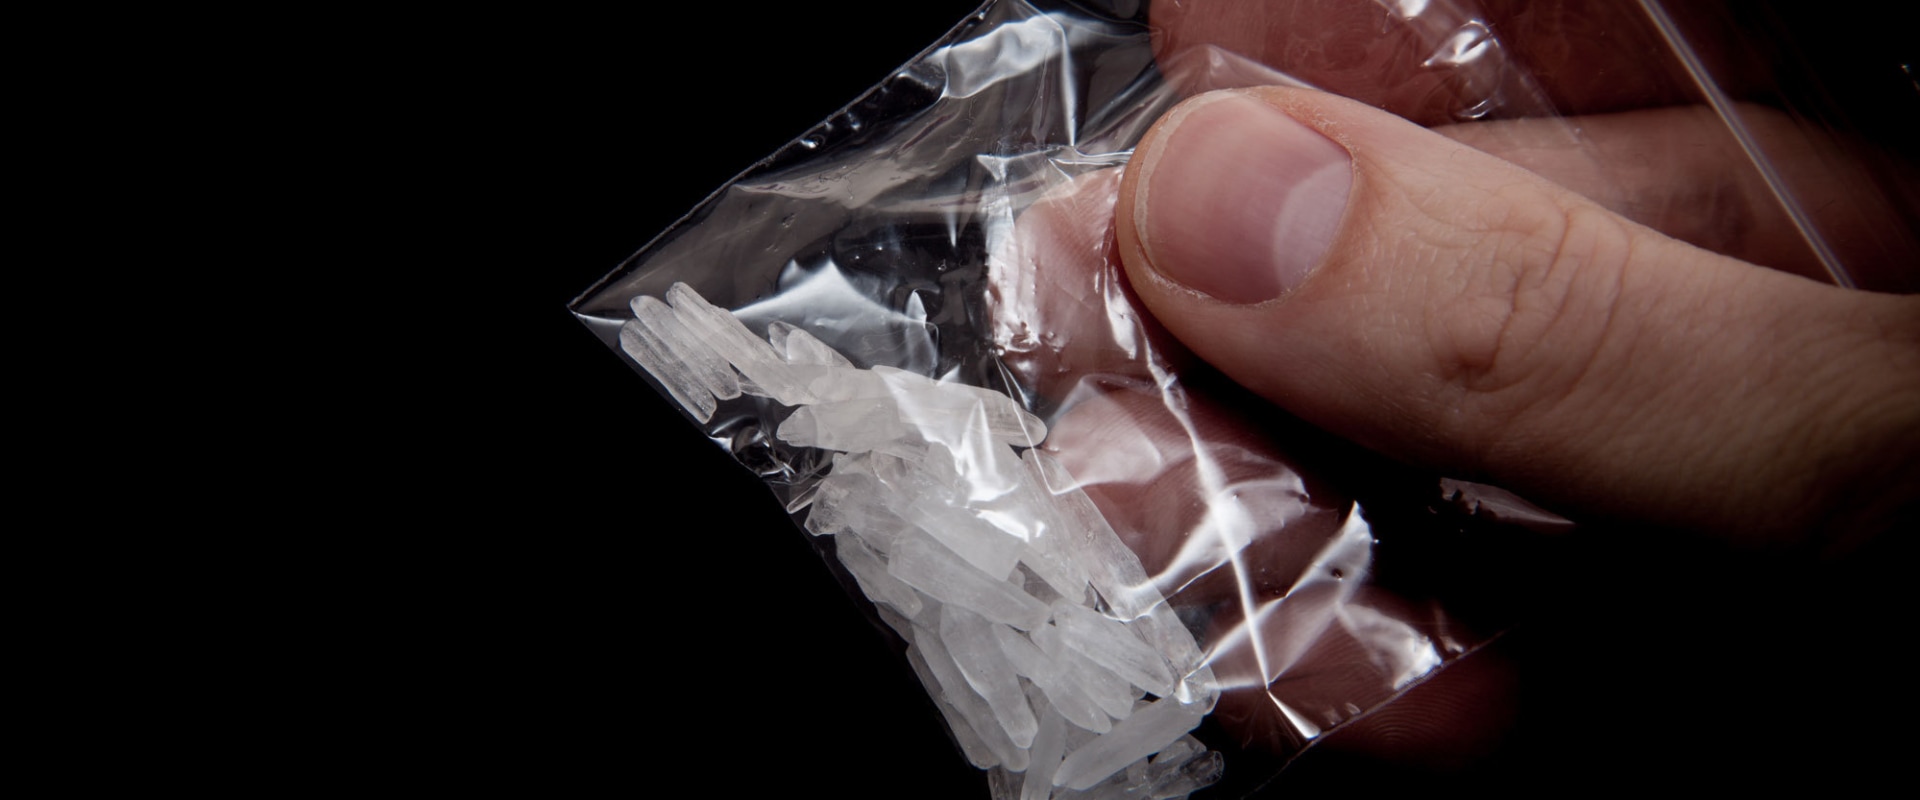 Is Crystal Meth Illegal in Canada? An Expert's Perspective